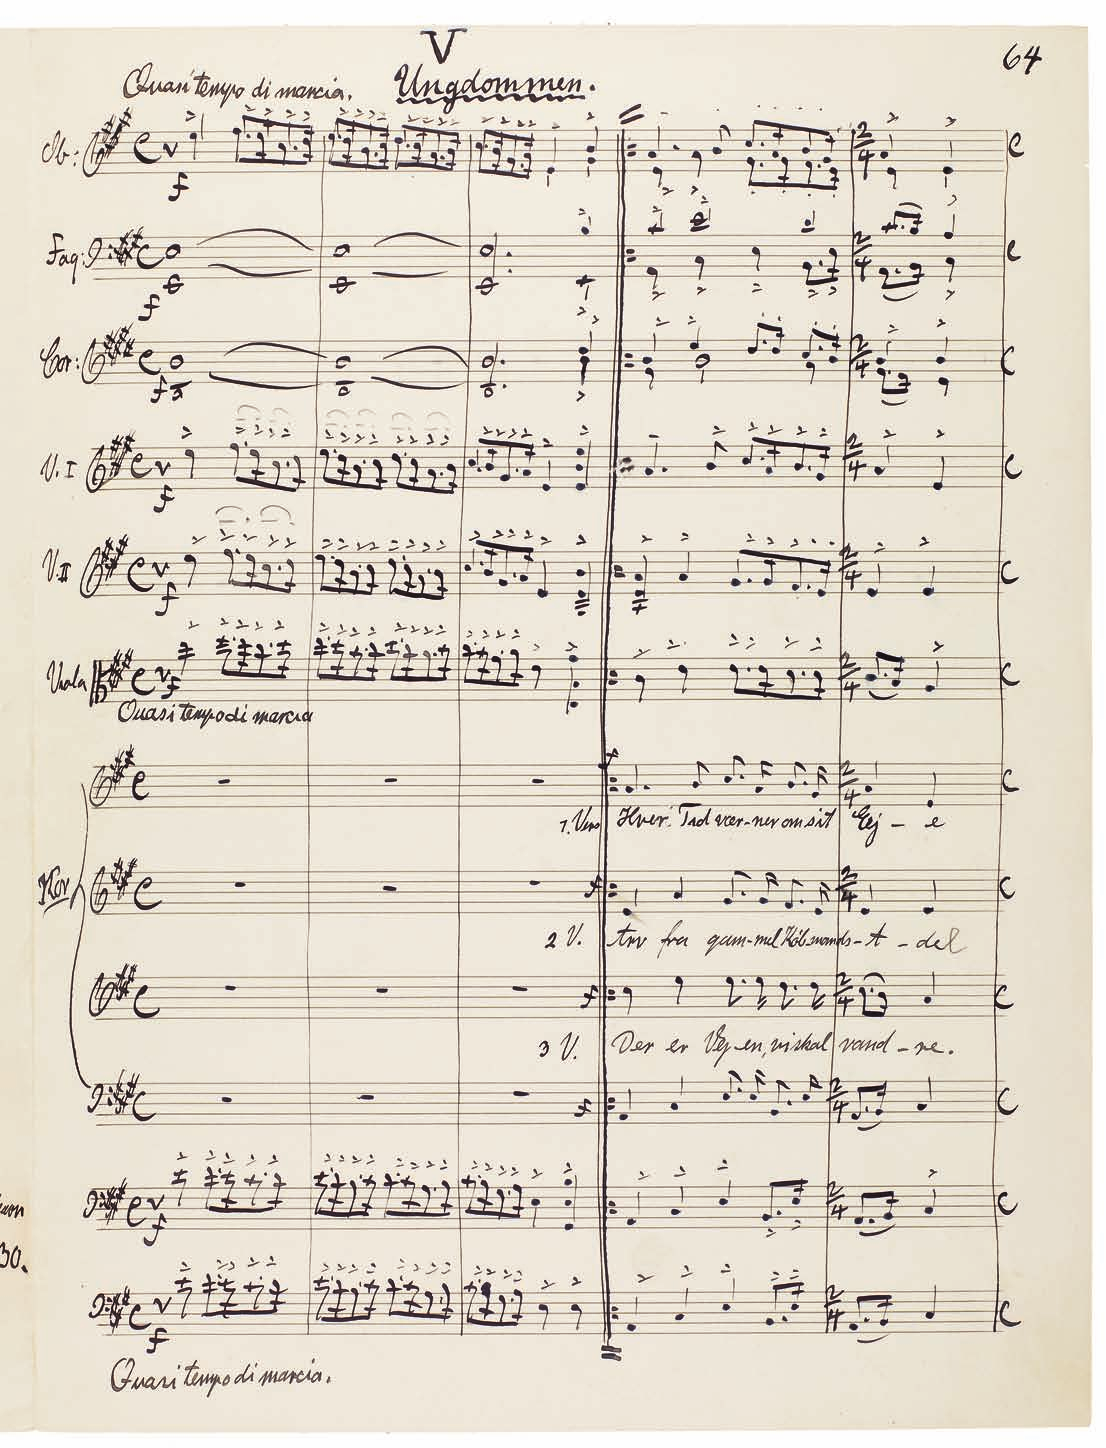 Cantata for the Fiftieth Anniversary of the Society for the Education of Young Merchants, No. 5, score, autograph, fair copy (Source A), bb. -5 showing articulation added in foreign hand in bb.